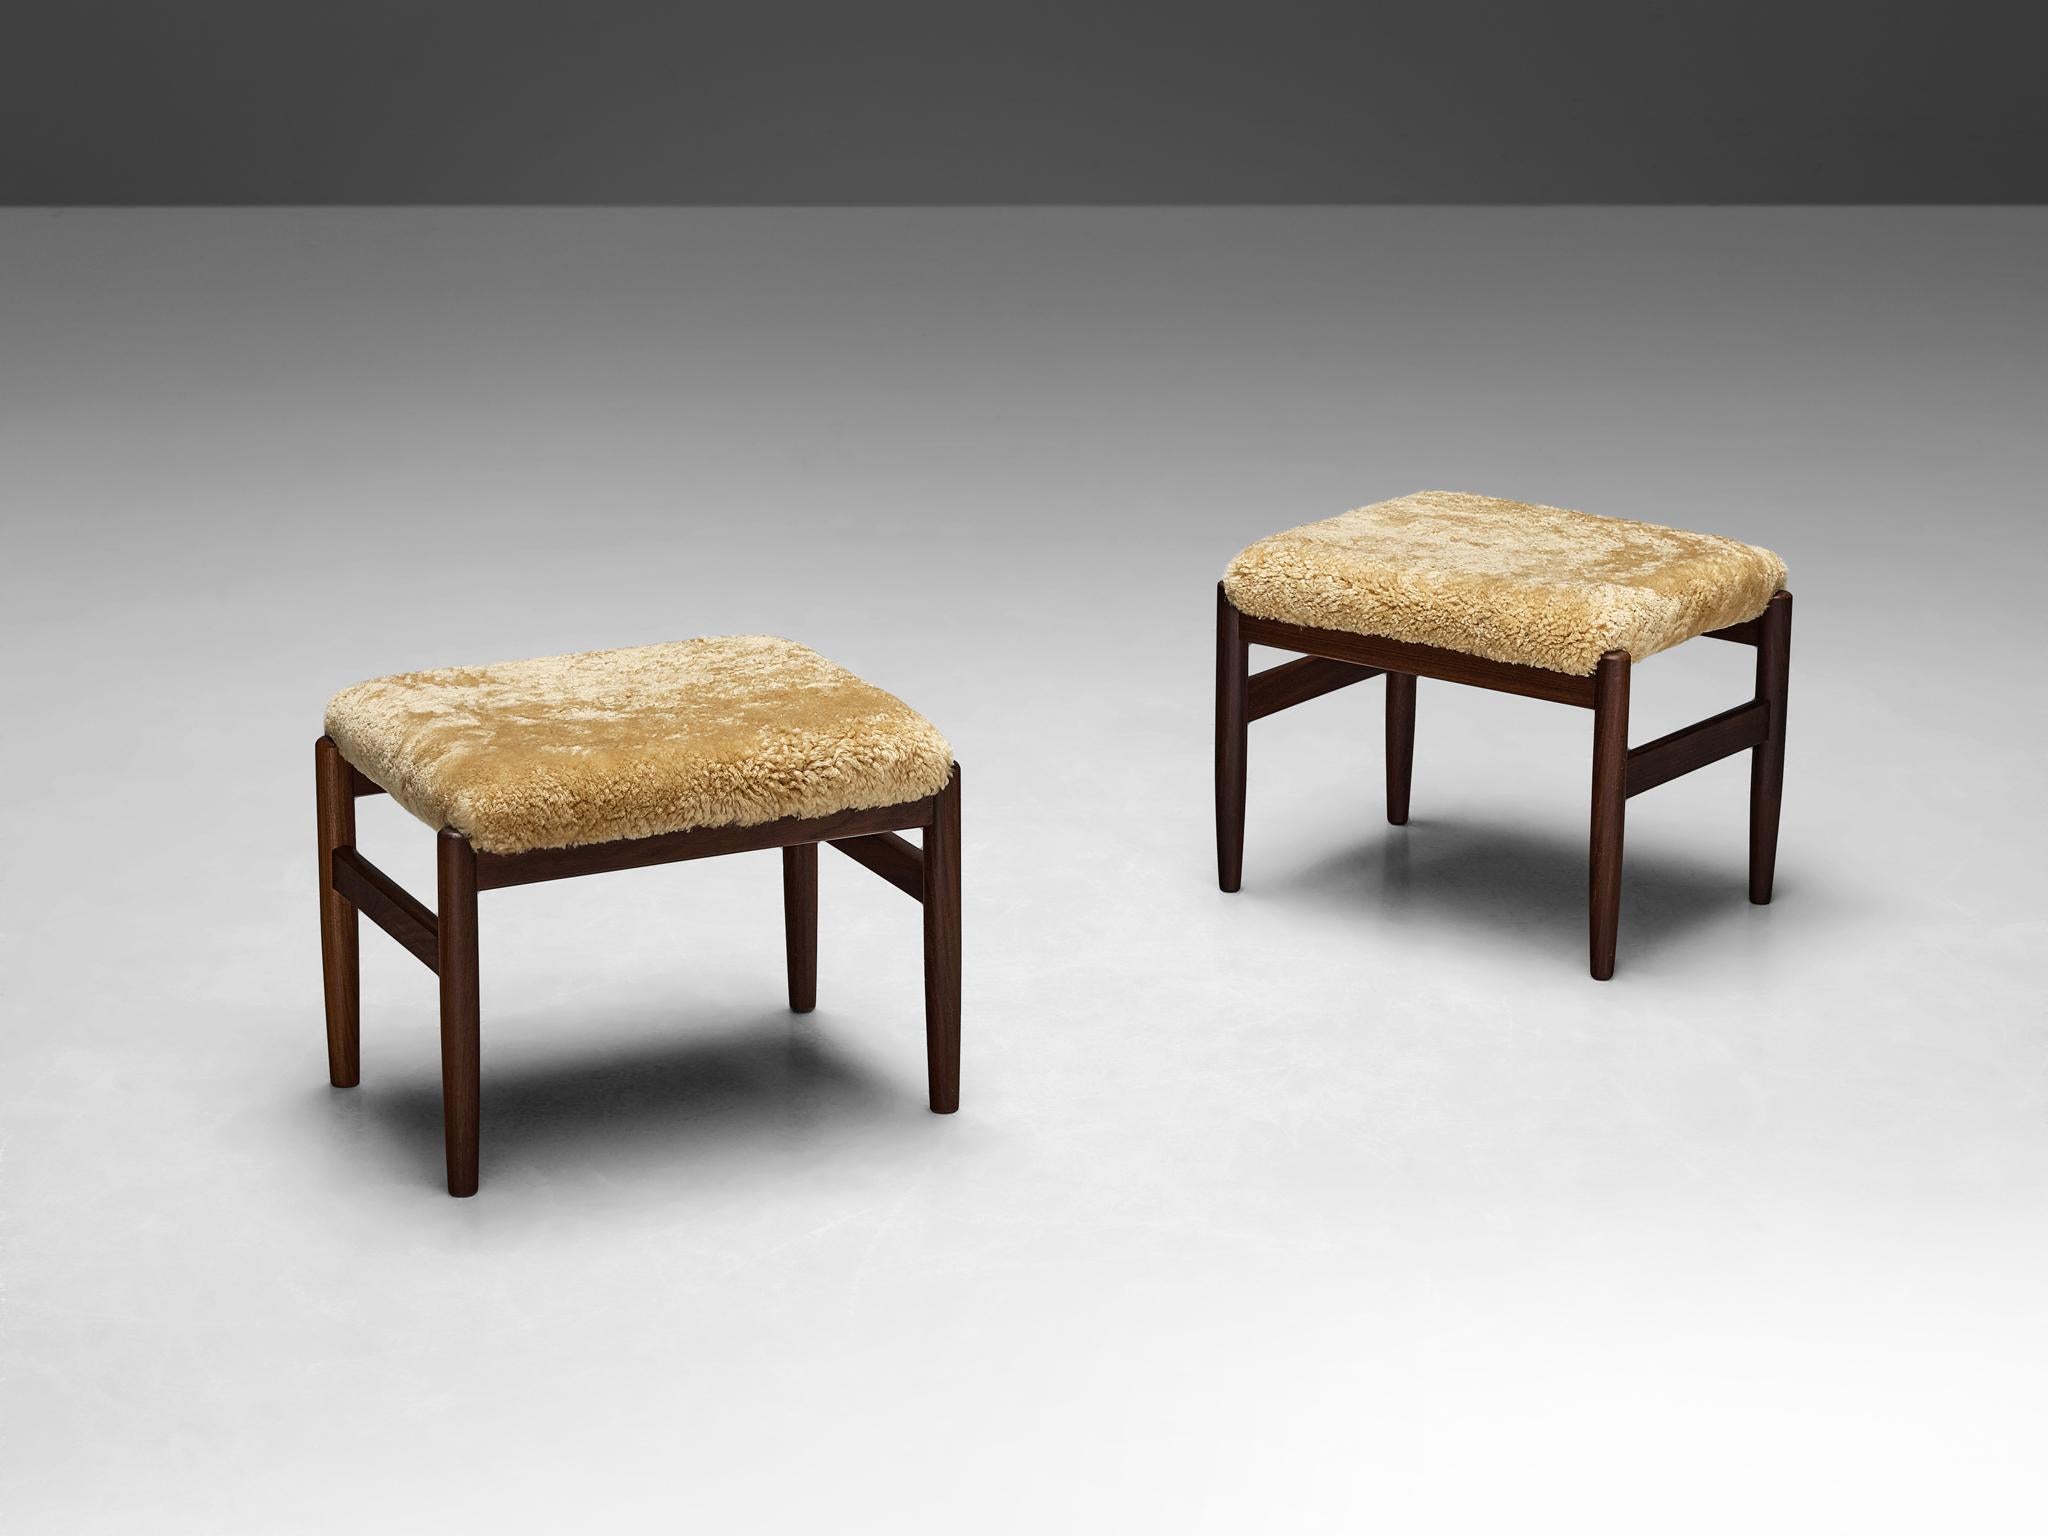 Ottomans or stools, Scandinavia, teak, shearling upholstery, 1960s

Exhibiting a timeless blend of simplicity and functionality, these stools epitomize the understated elegance characteristic of Mid-Century Scandinavian design. Crafted from teak,